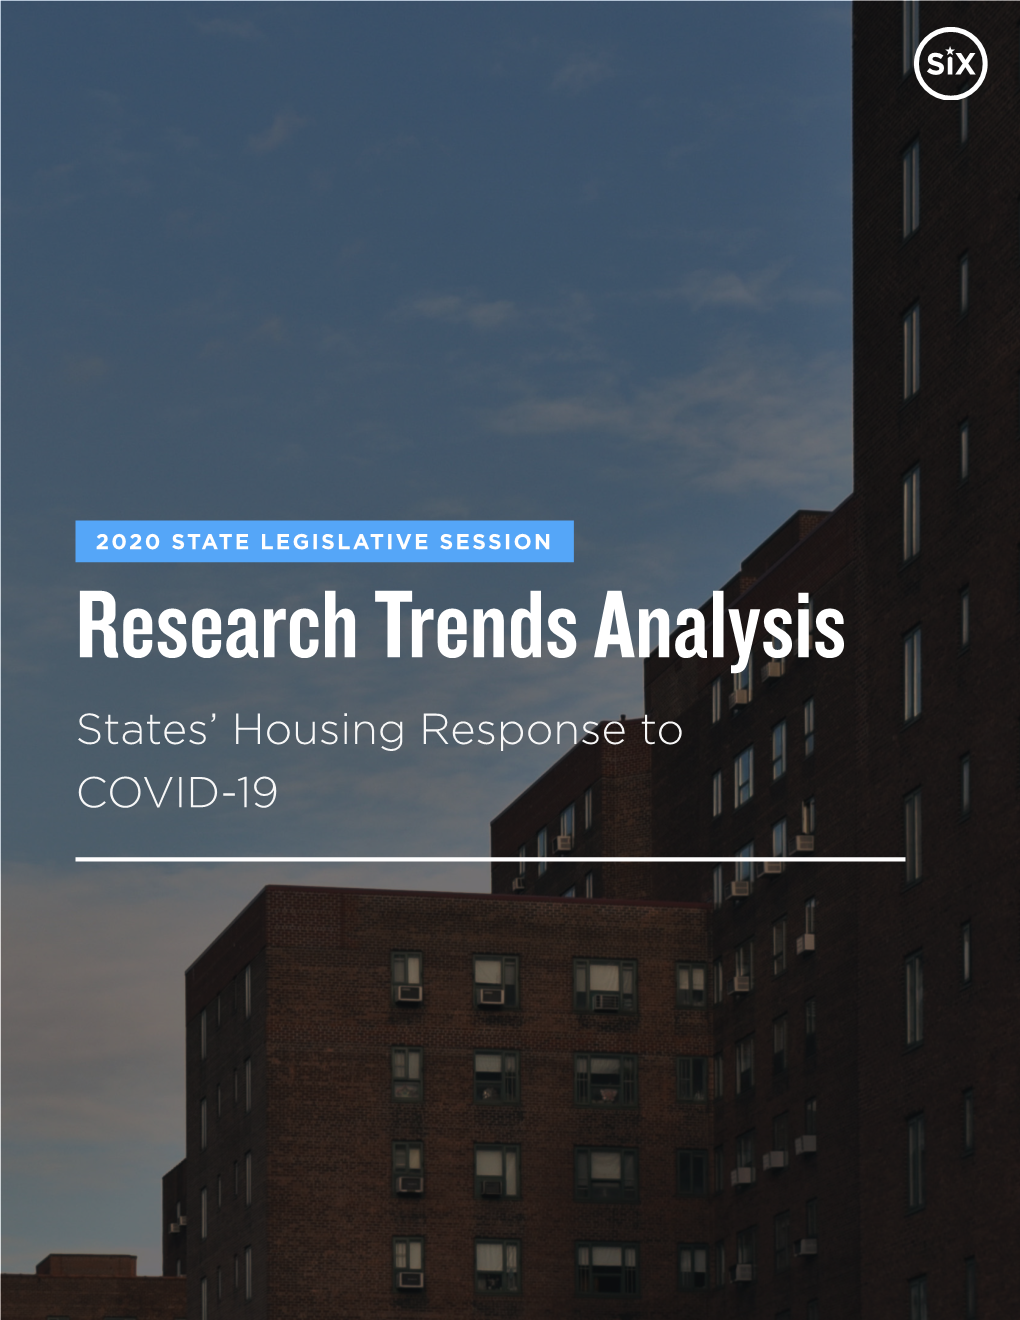 Research Trends Analysis States’ Housing Response to COVID-19 Introduction